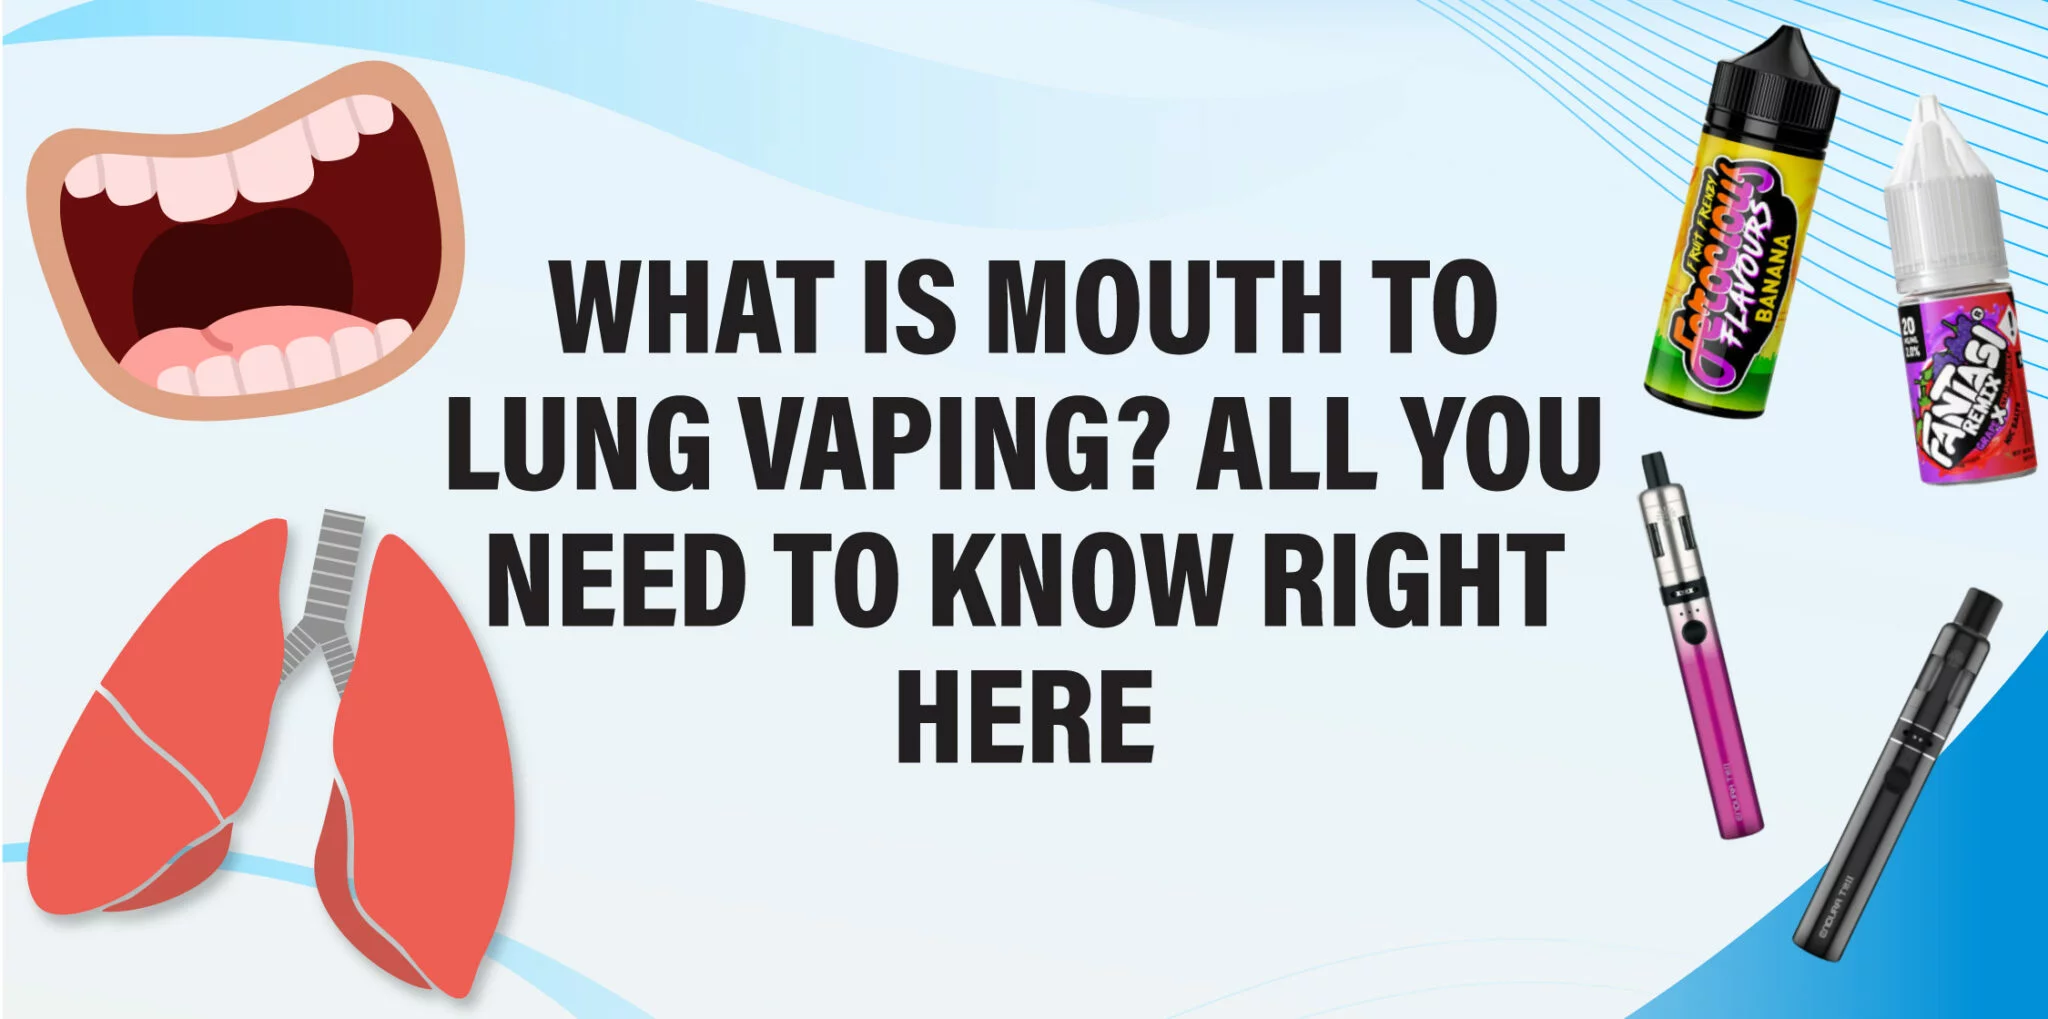 what is mouth to lung vaping? all you need to know